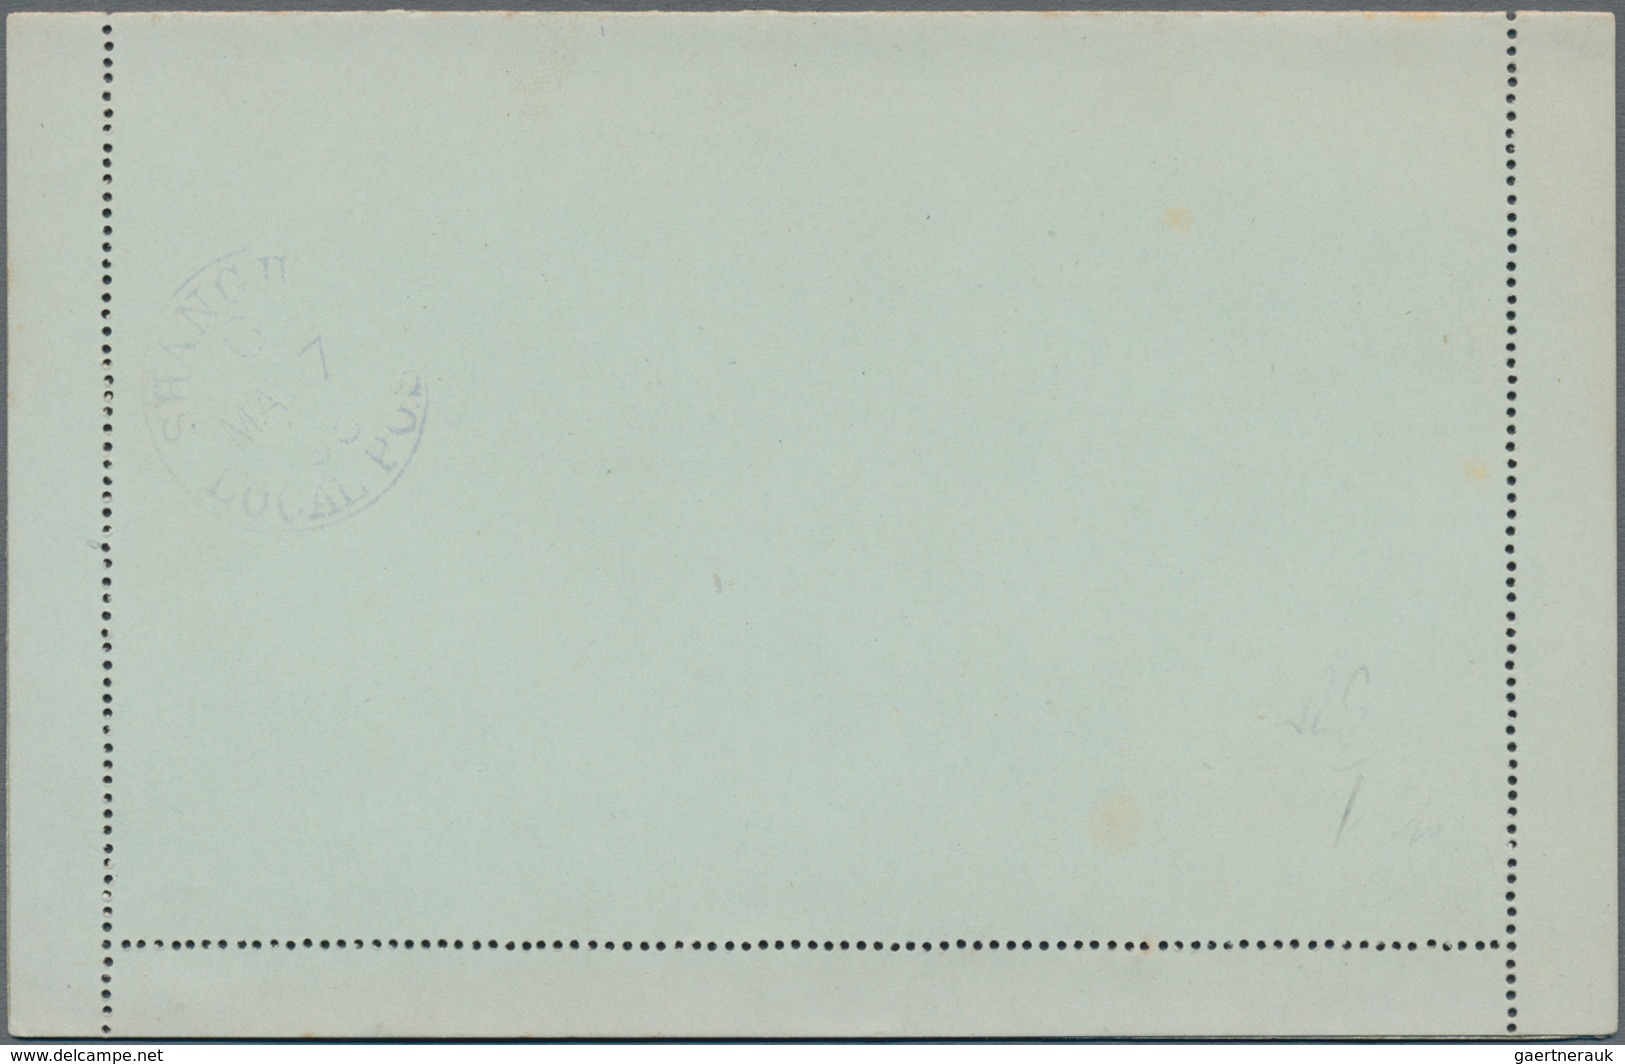 China - Ganzsachen: 1894/1912, group of stationery (5, inc. Shanghai LPO cto/addressed x2) with squa